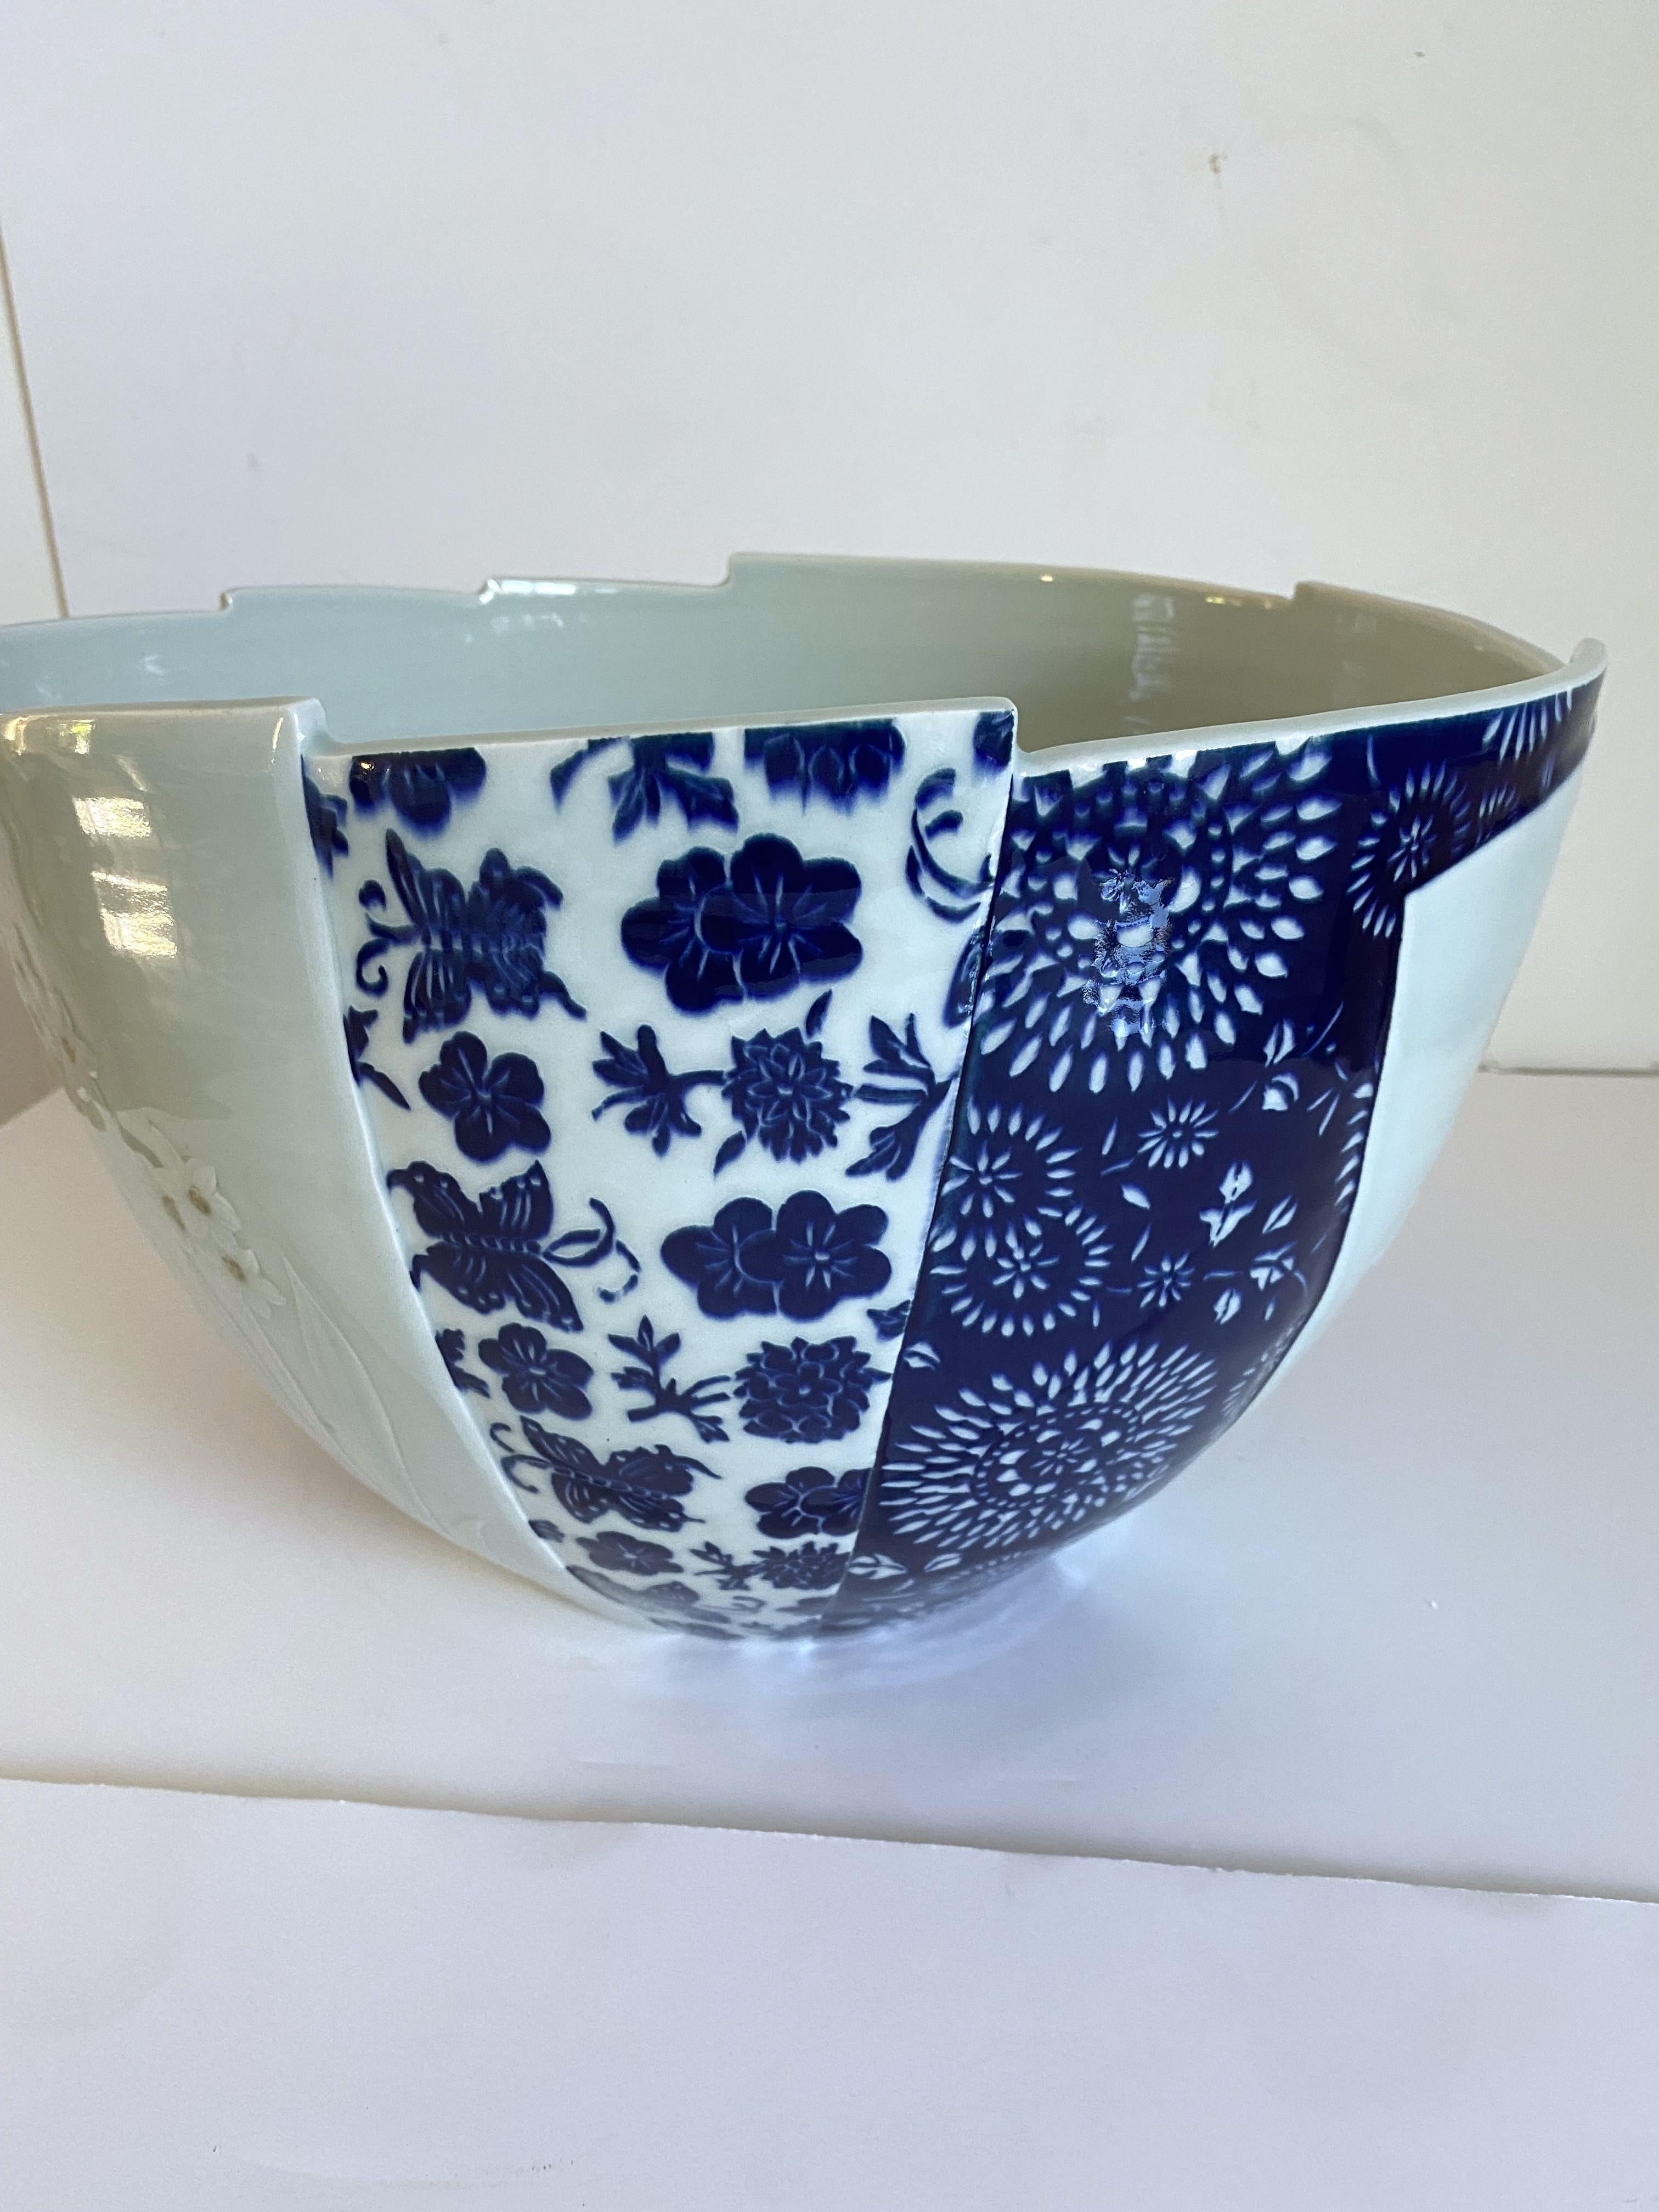 A modern Chinese hand-painted bowl.